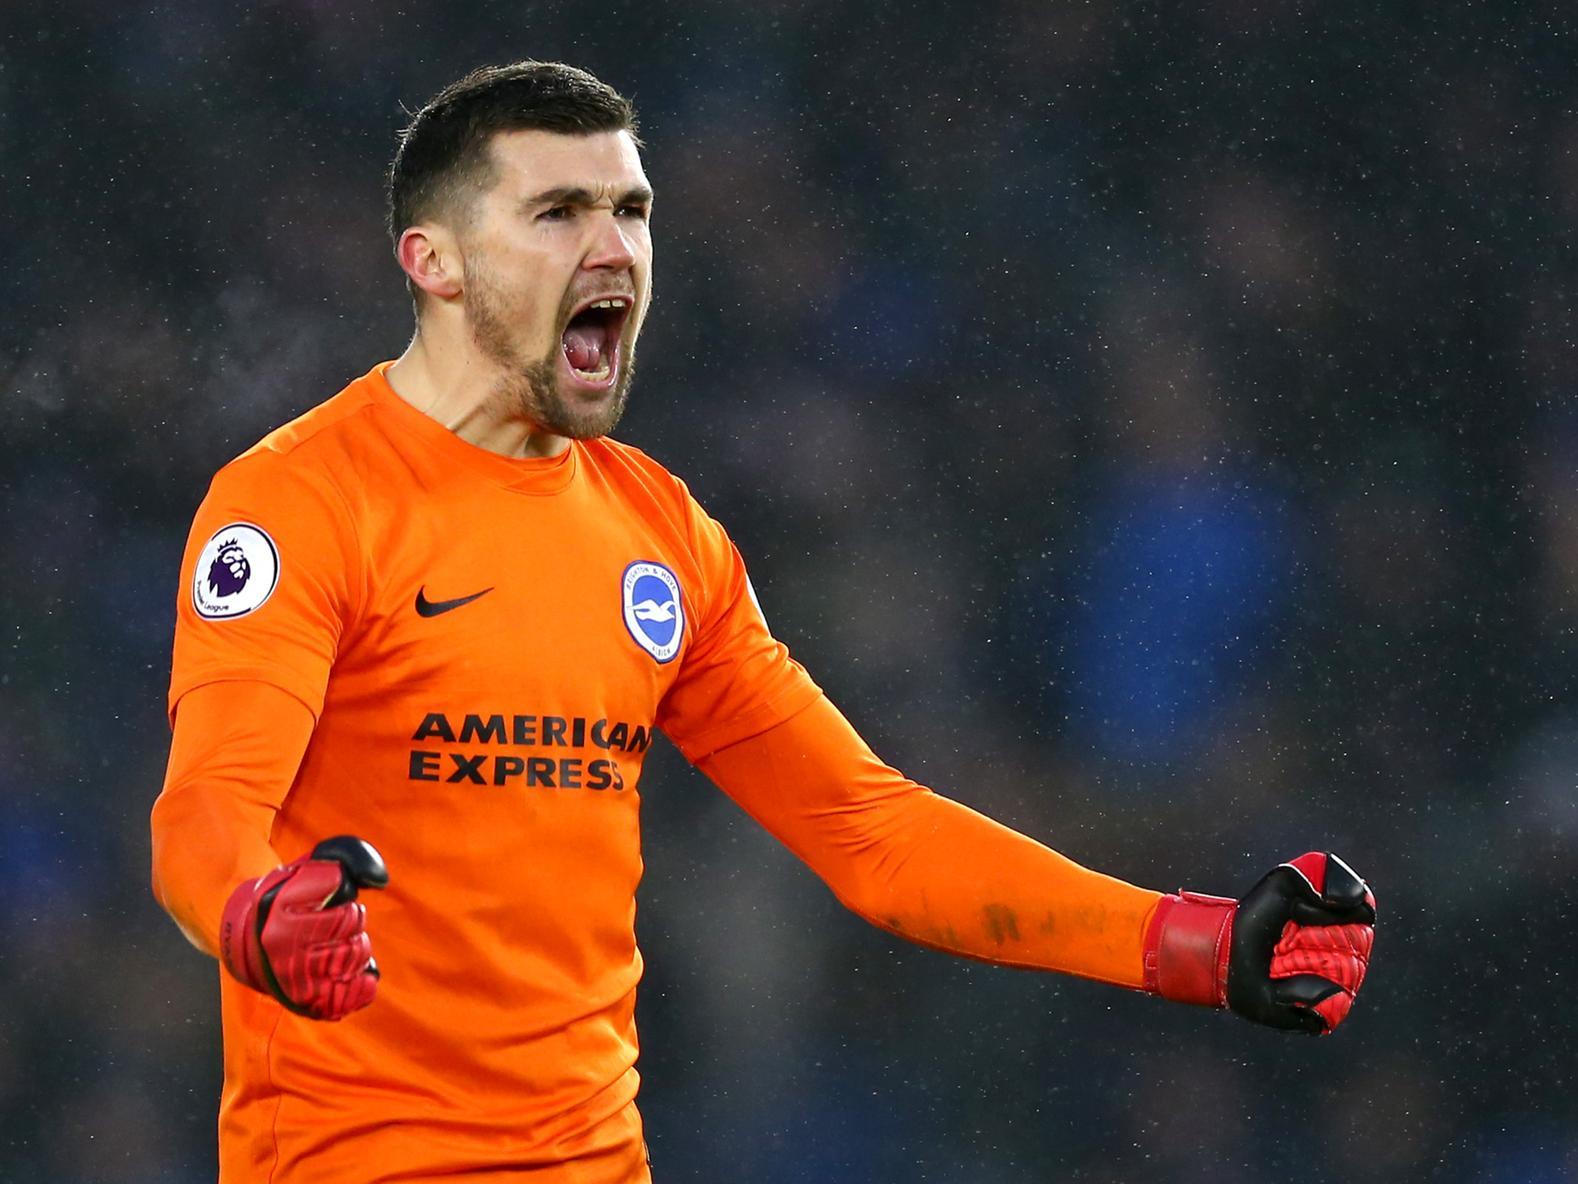 Has played in every Premier League game for Brighton so far this season.